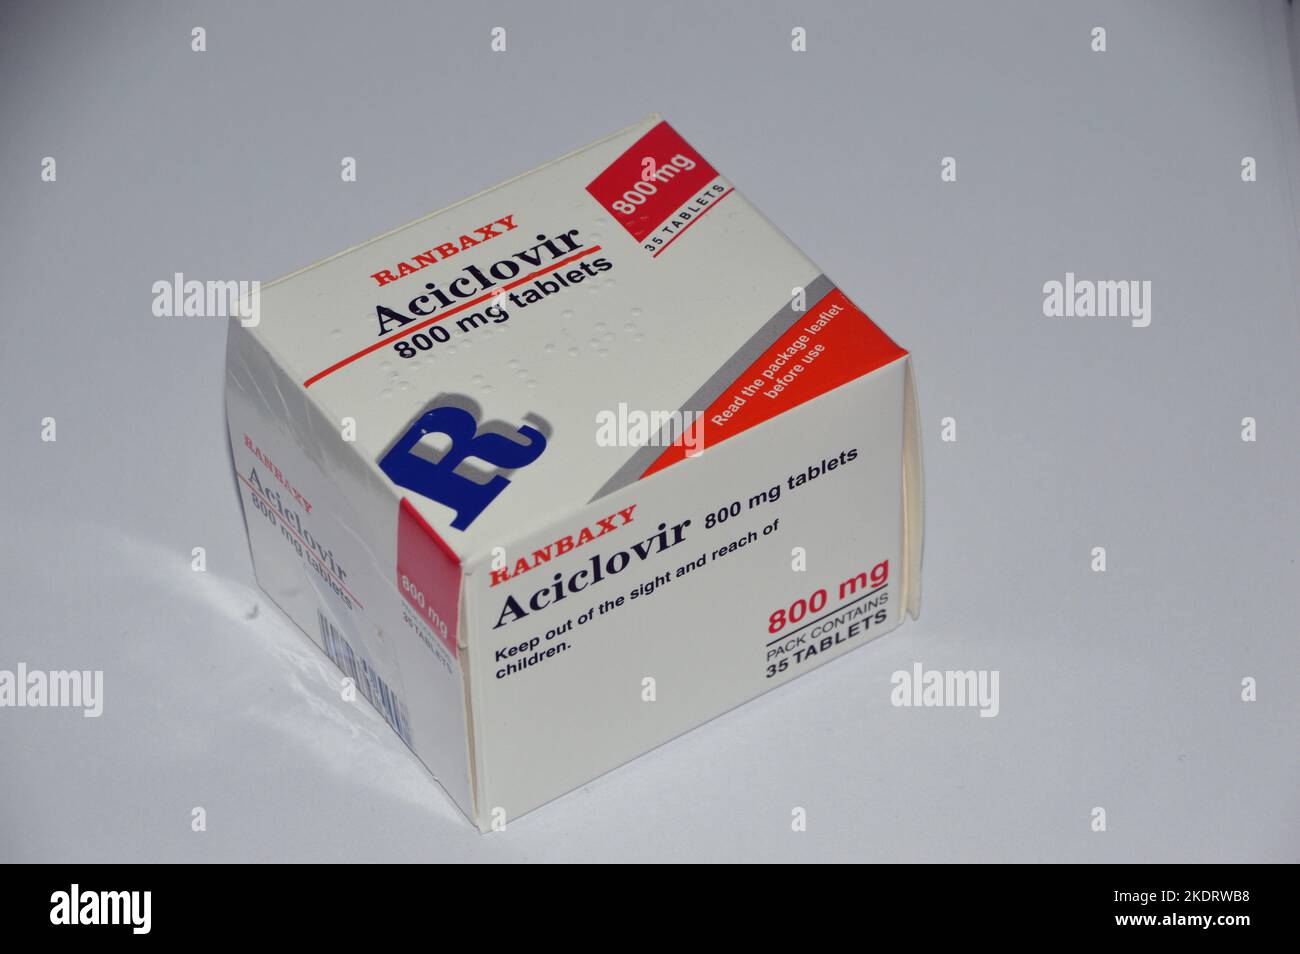 A Box of 35, 800mg Aciclovir Tablets made by Banbaxy an Antiviral Medication Prescribed for Herpes Simplex Virus Infections, (Chickenpox & Shingles) Stock Photo